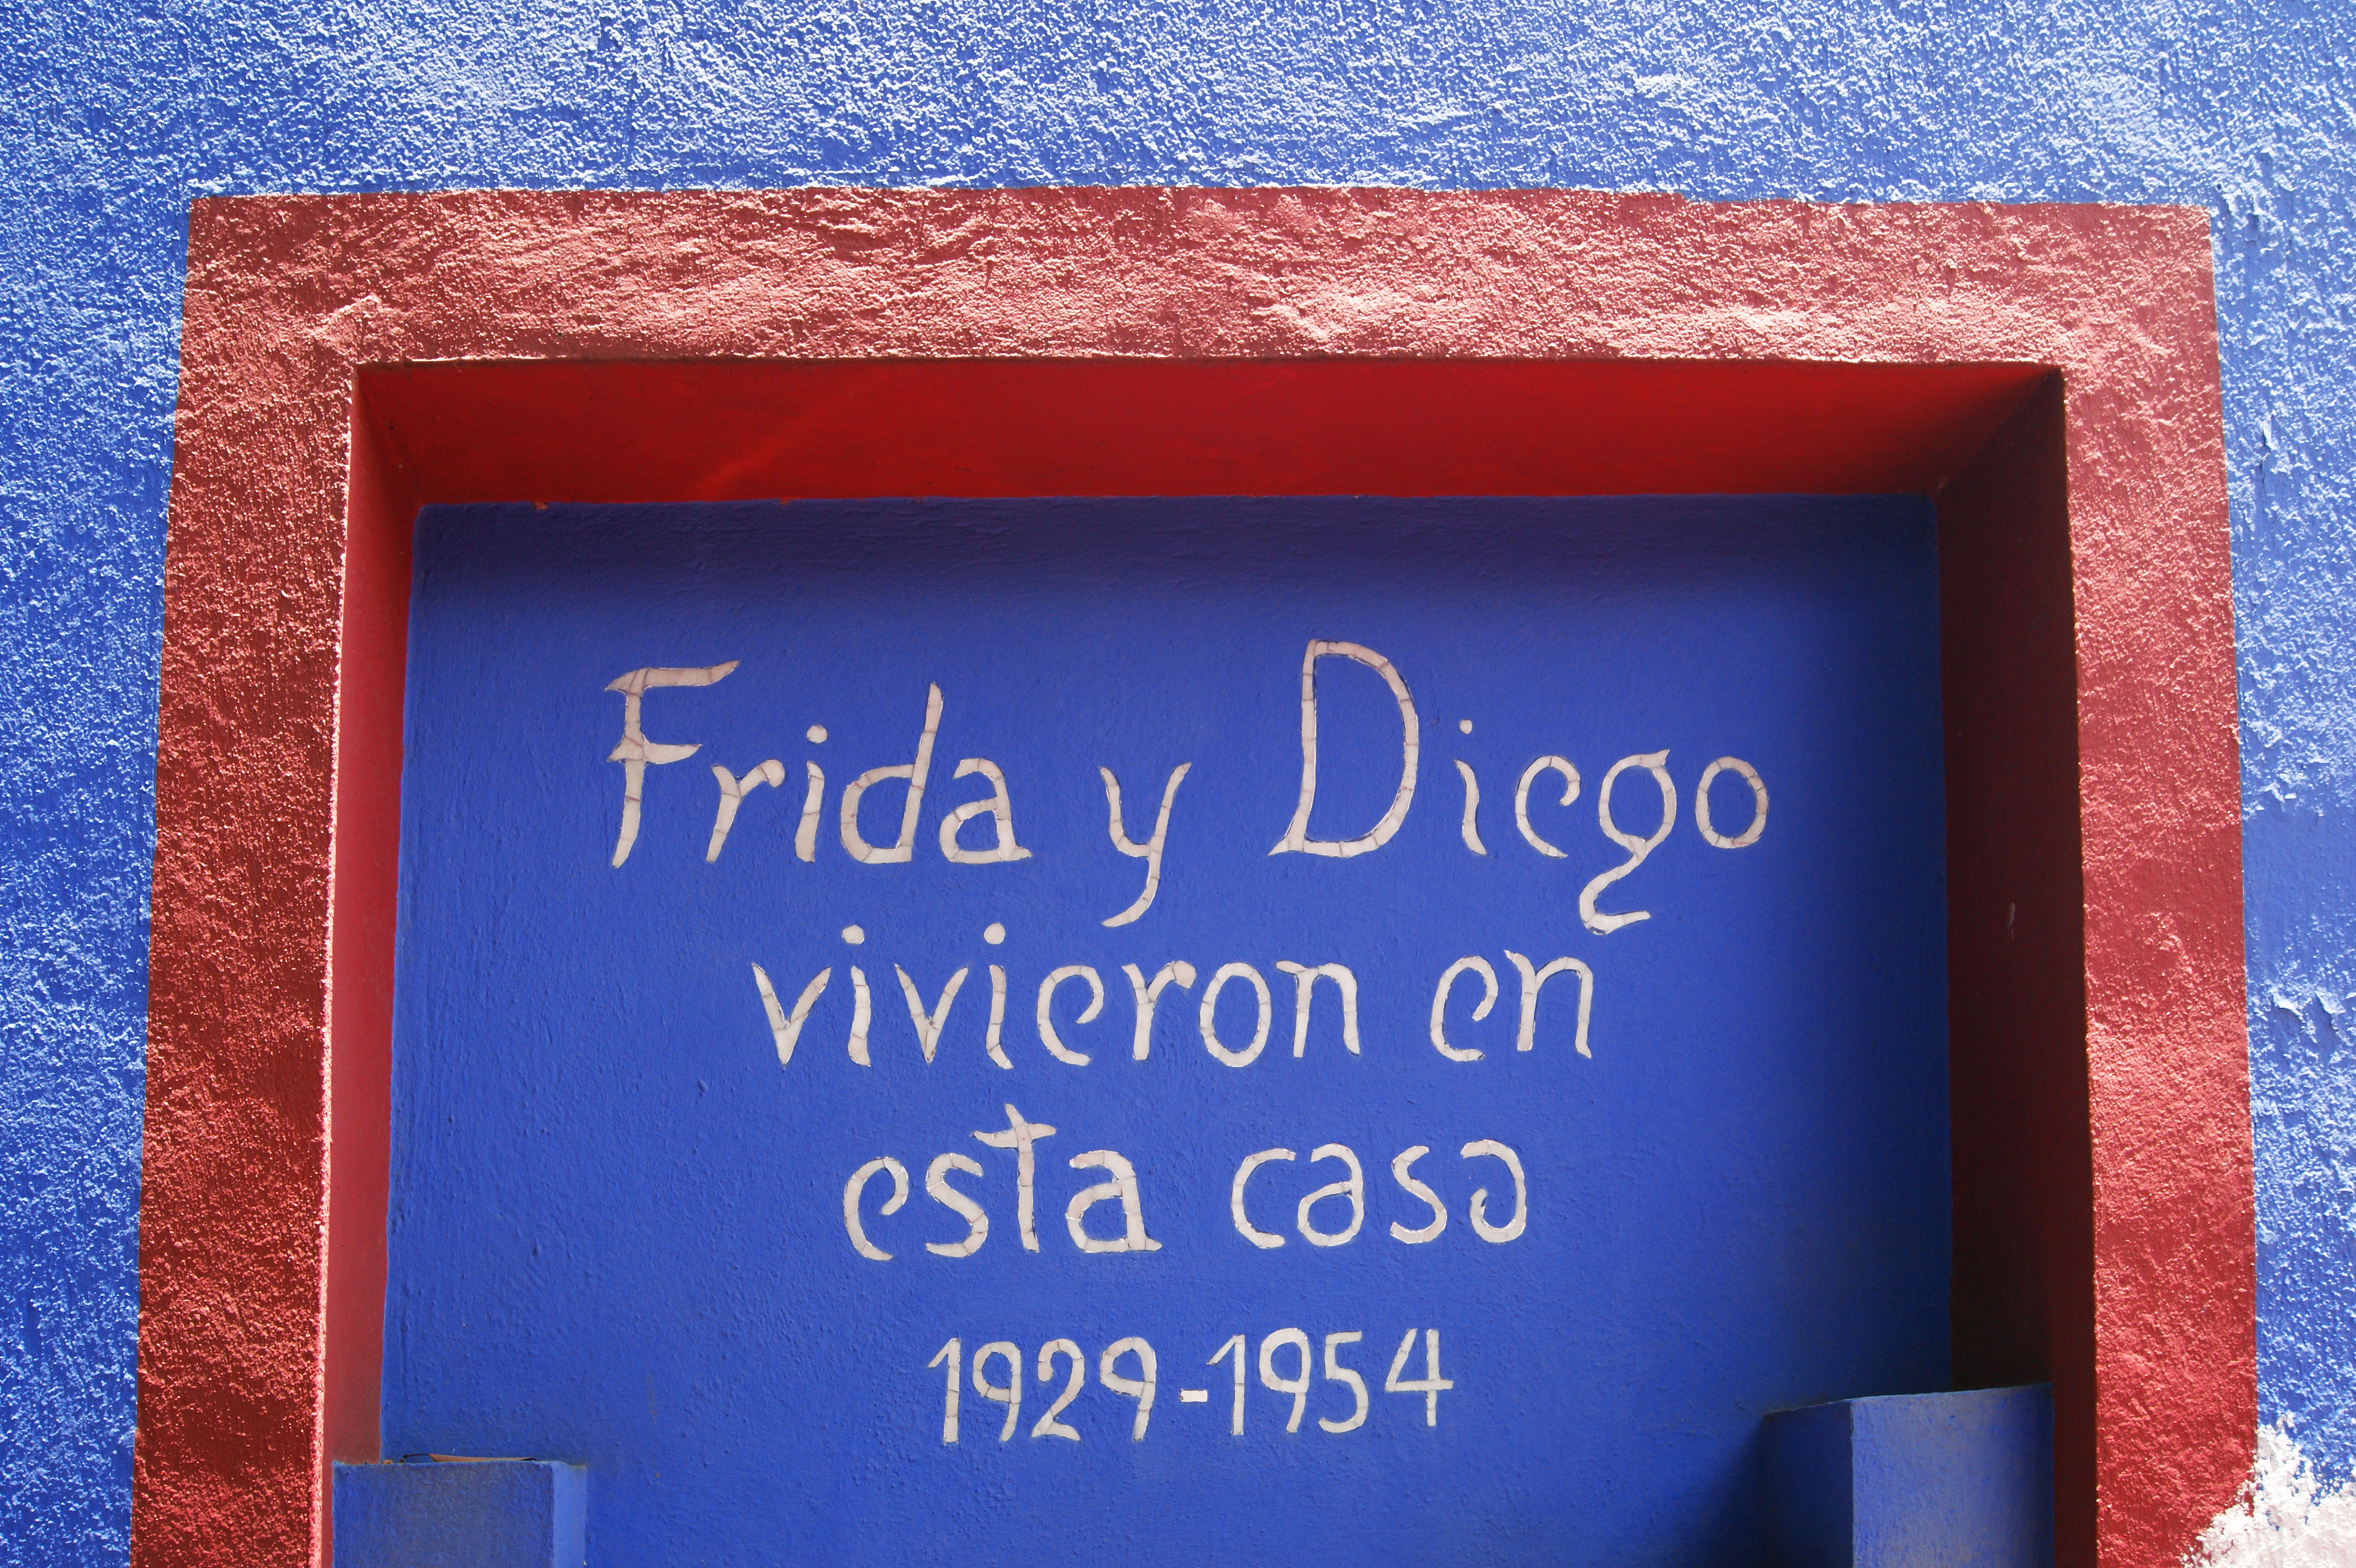 "Frida and Diego lived in this house. 1929-1954"